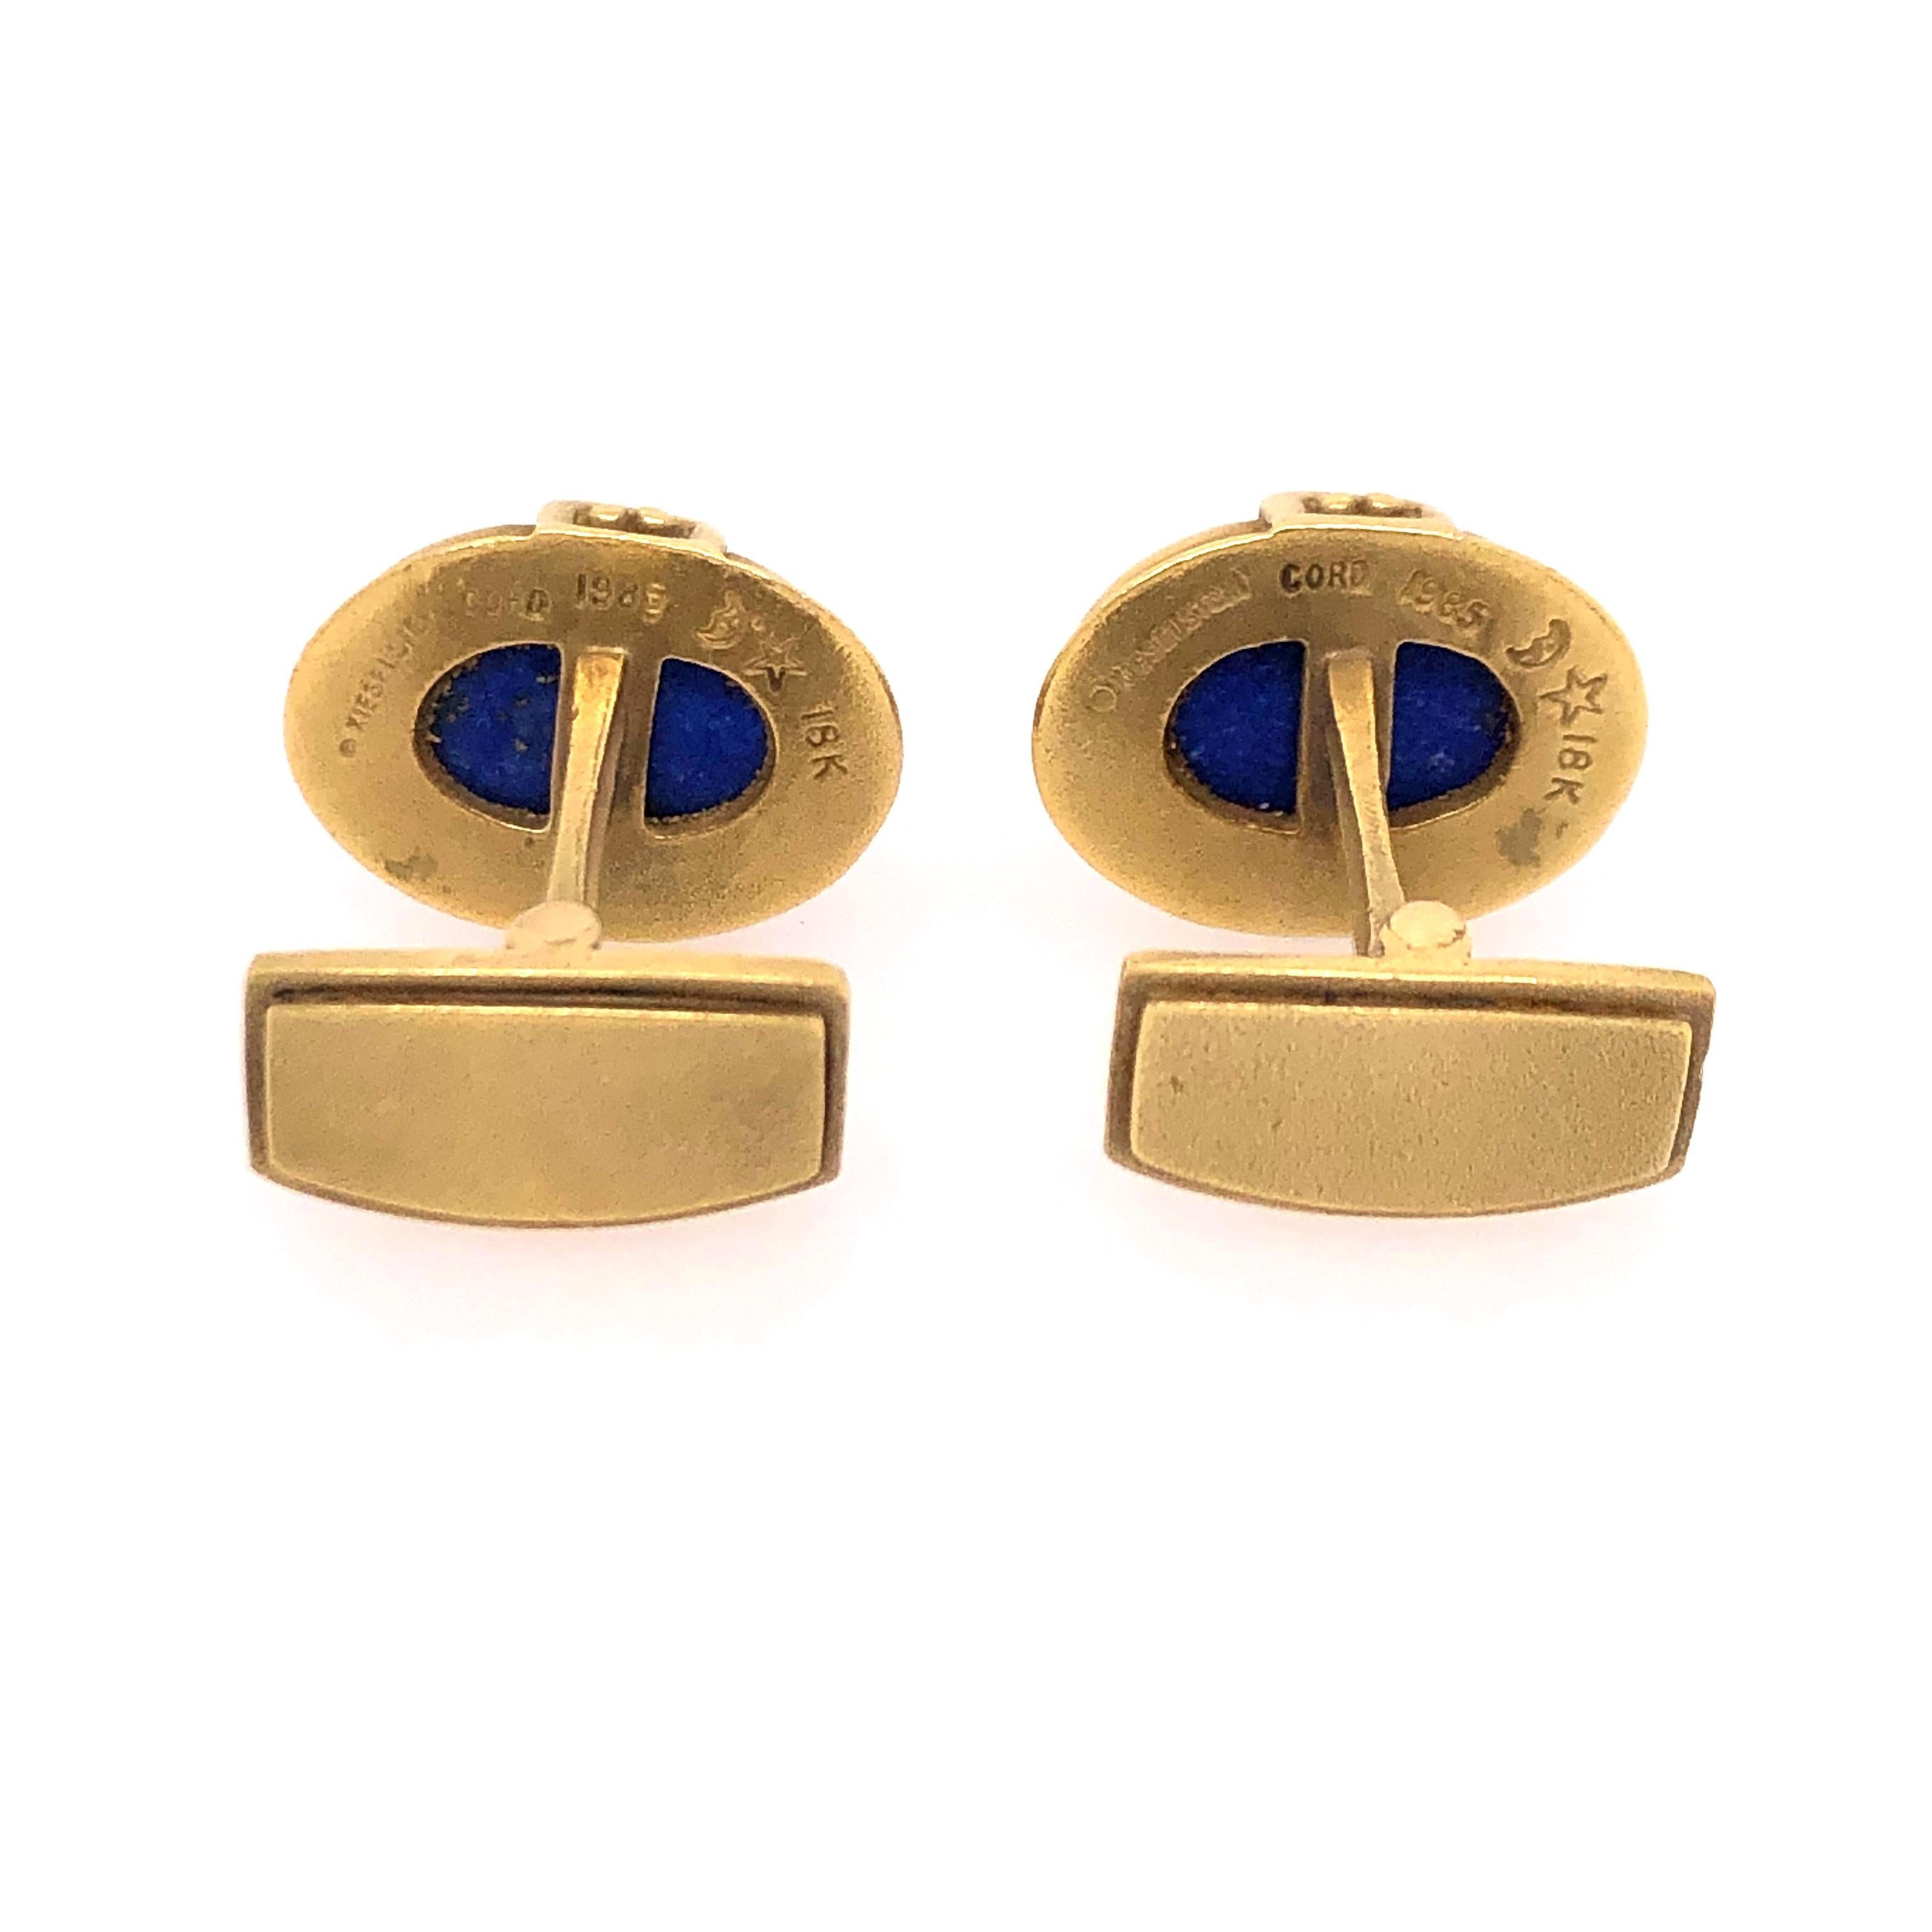 Vintage Yellow Gold Kielstein Oval Lapis Intaglio by Sun and Moon carved lapis and yellow gold cuff links with detail and granulation on the sides.    

Stamped: ©KIESELSTEIN, CORD, 1985, (MOON ANDF STAR IMAGE), 18K